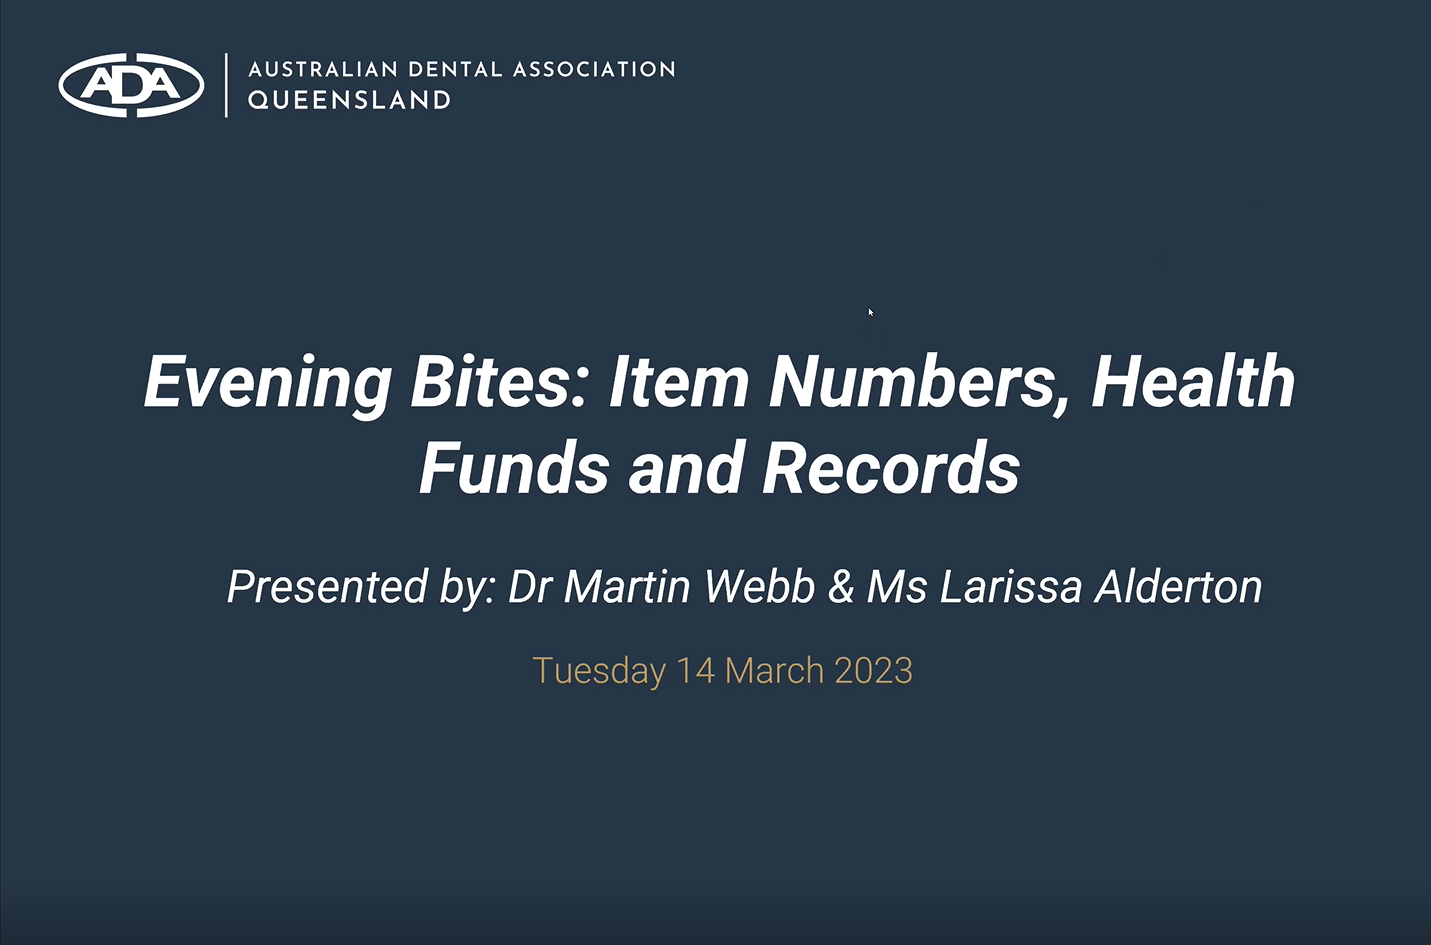 Evening Bites: Item Numbers Health Funds and Records